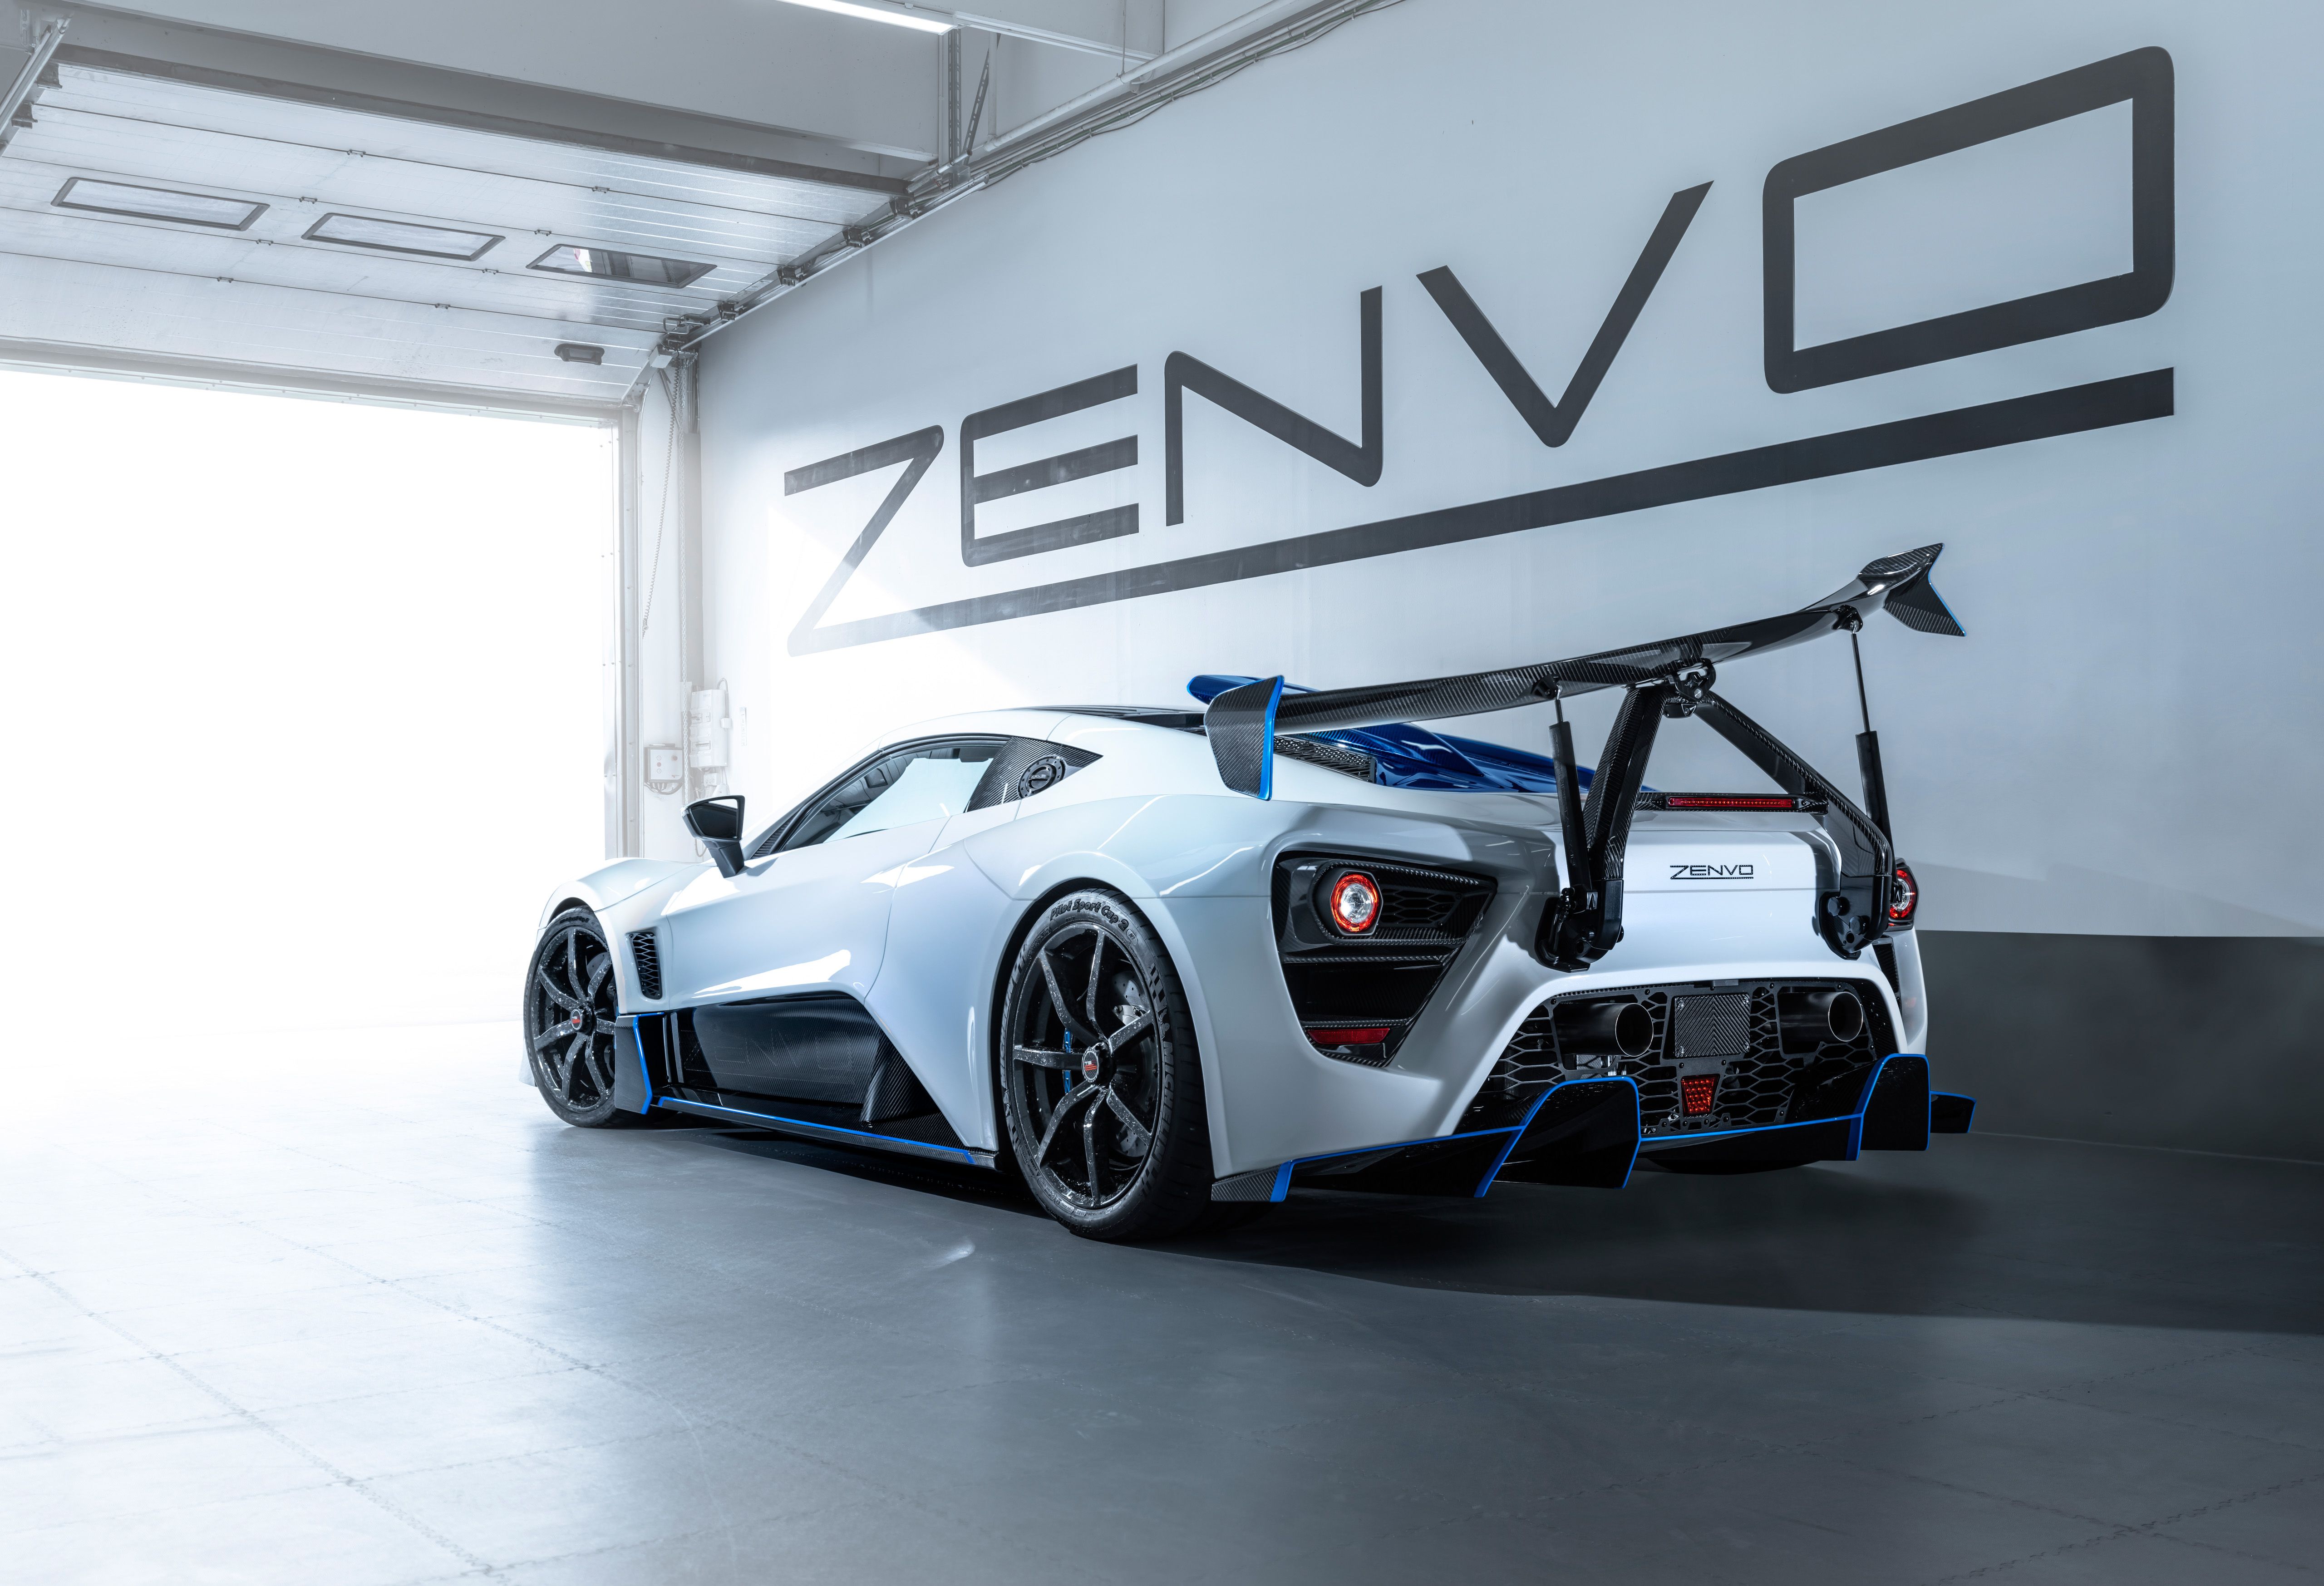 2022 Zenvo Aims to Rattle the Hypercar Market With a New V-12 Hybrid Road Missle